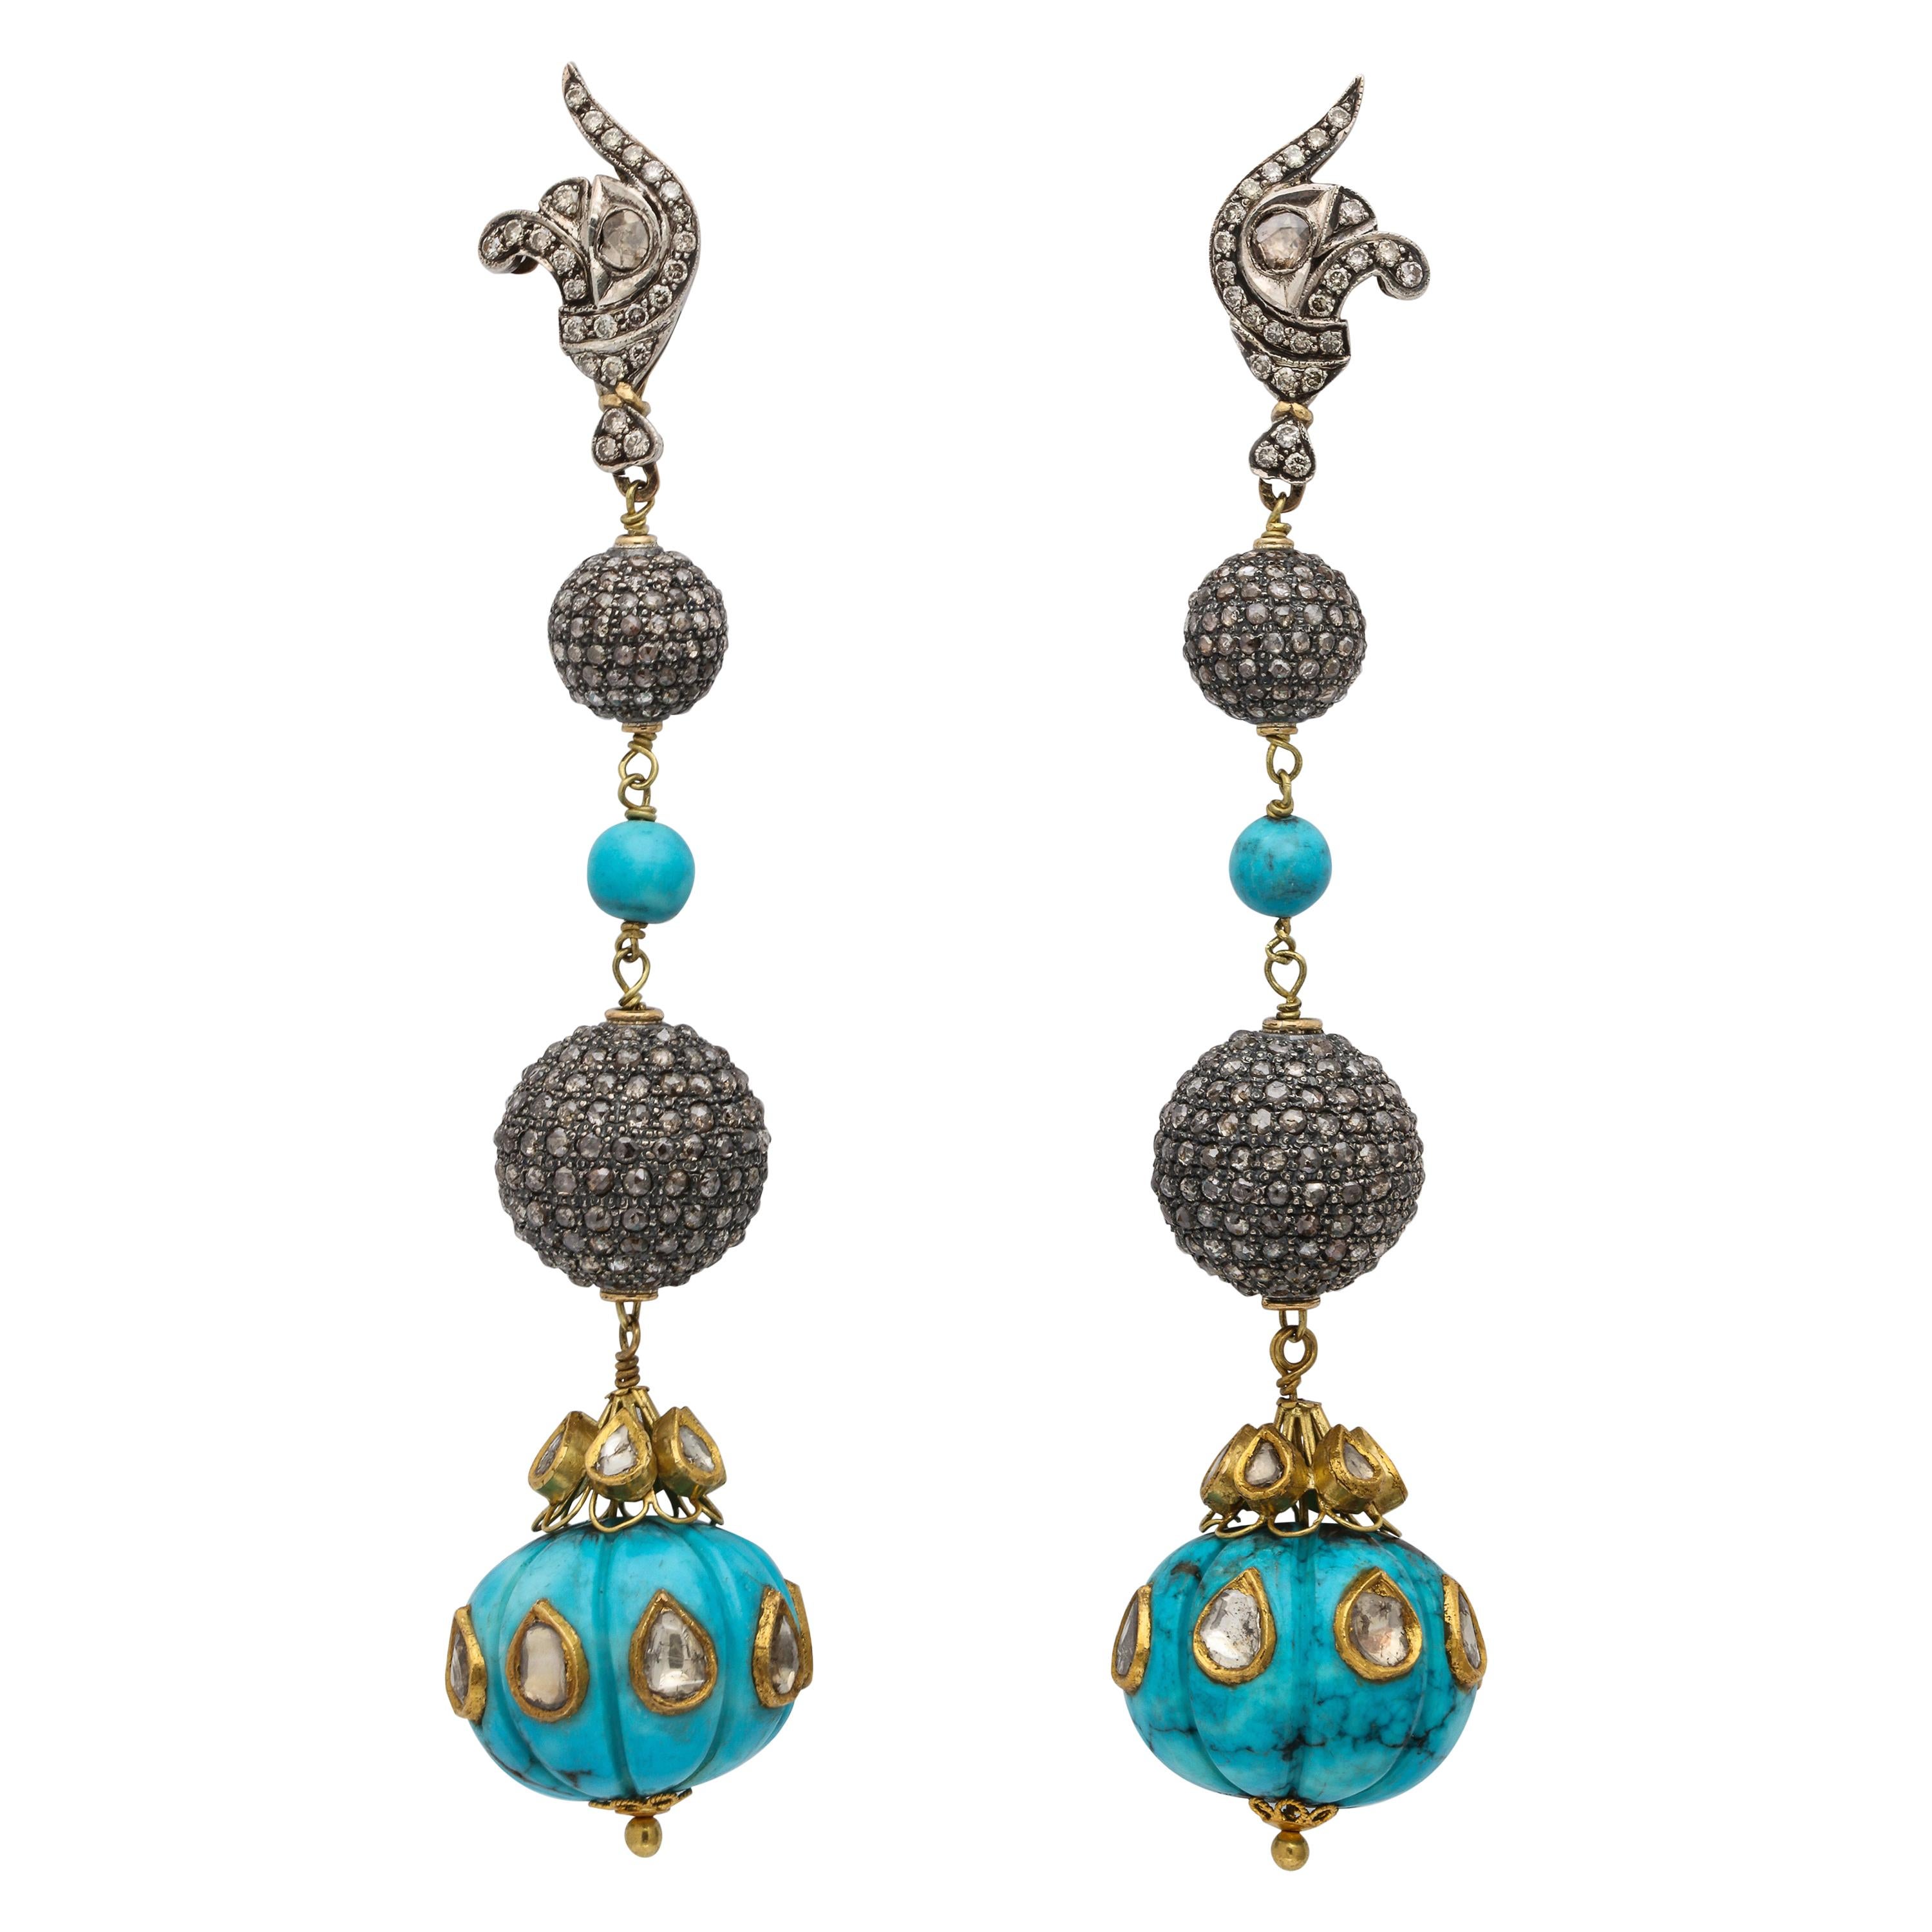 Vintage Estate Drop Turquoise Earrings with Rose Cut Diamonds